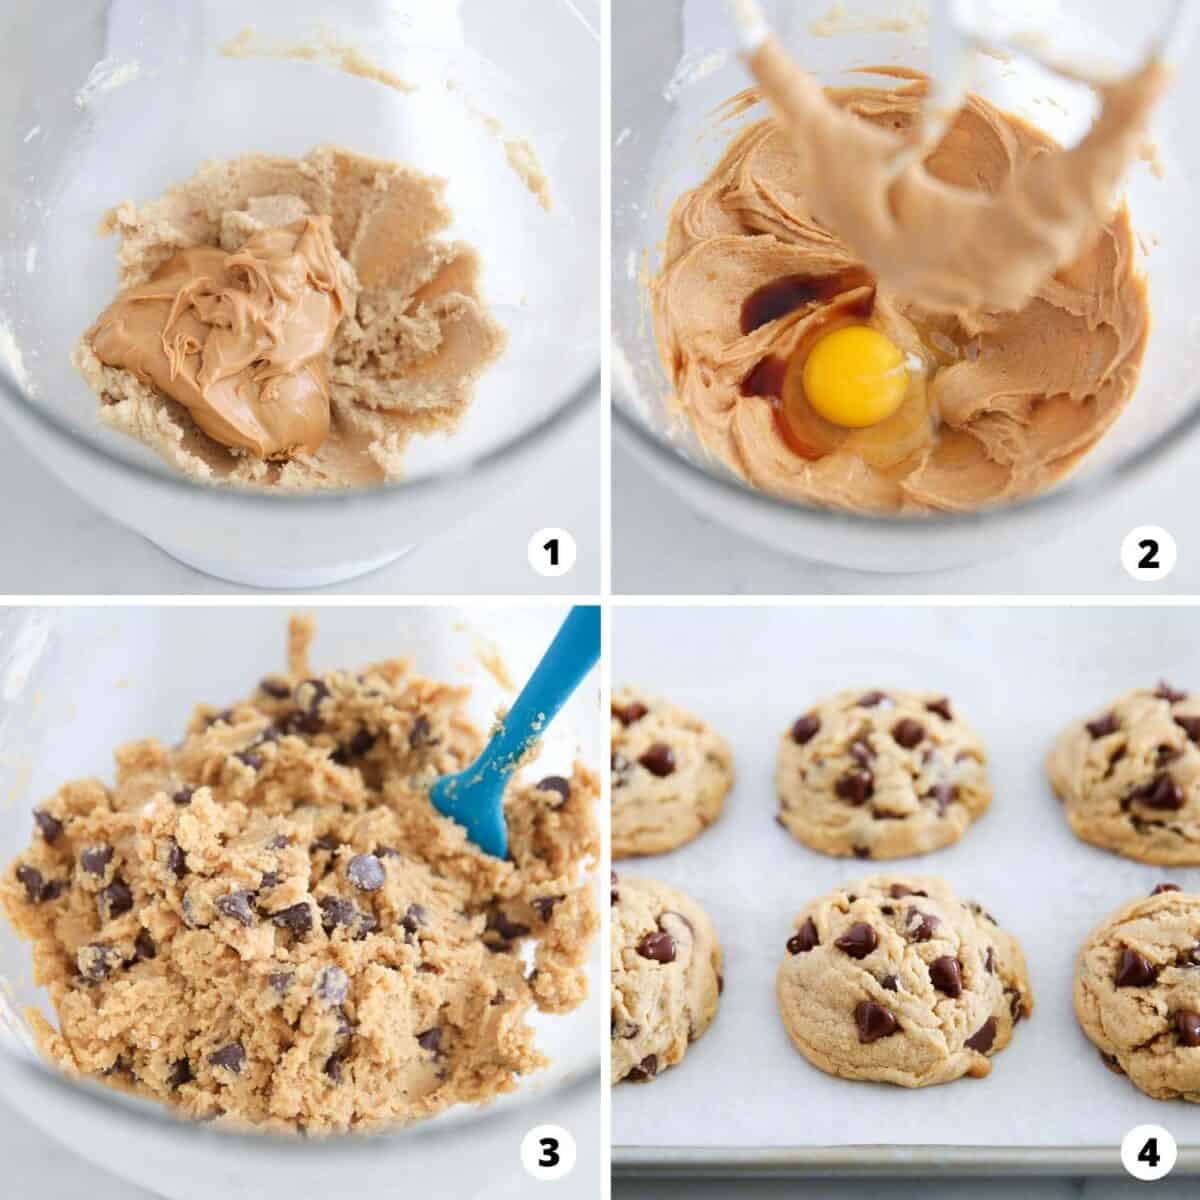 Showing how to make peanut butter chocolate chip cookies in a 4 step collage.